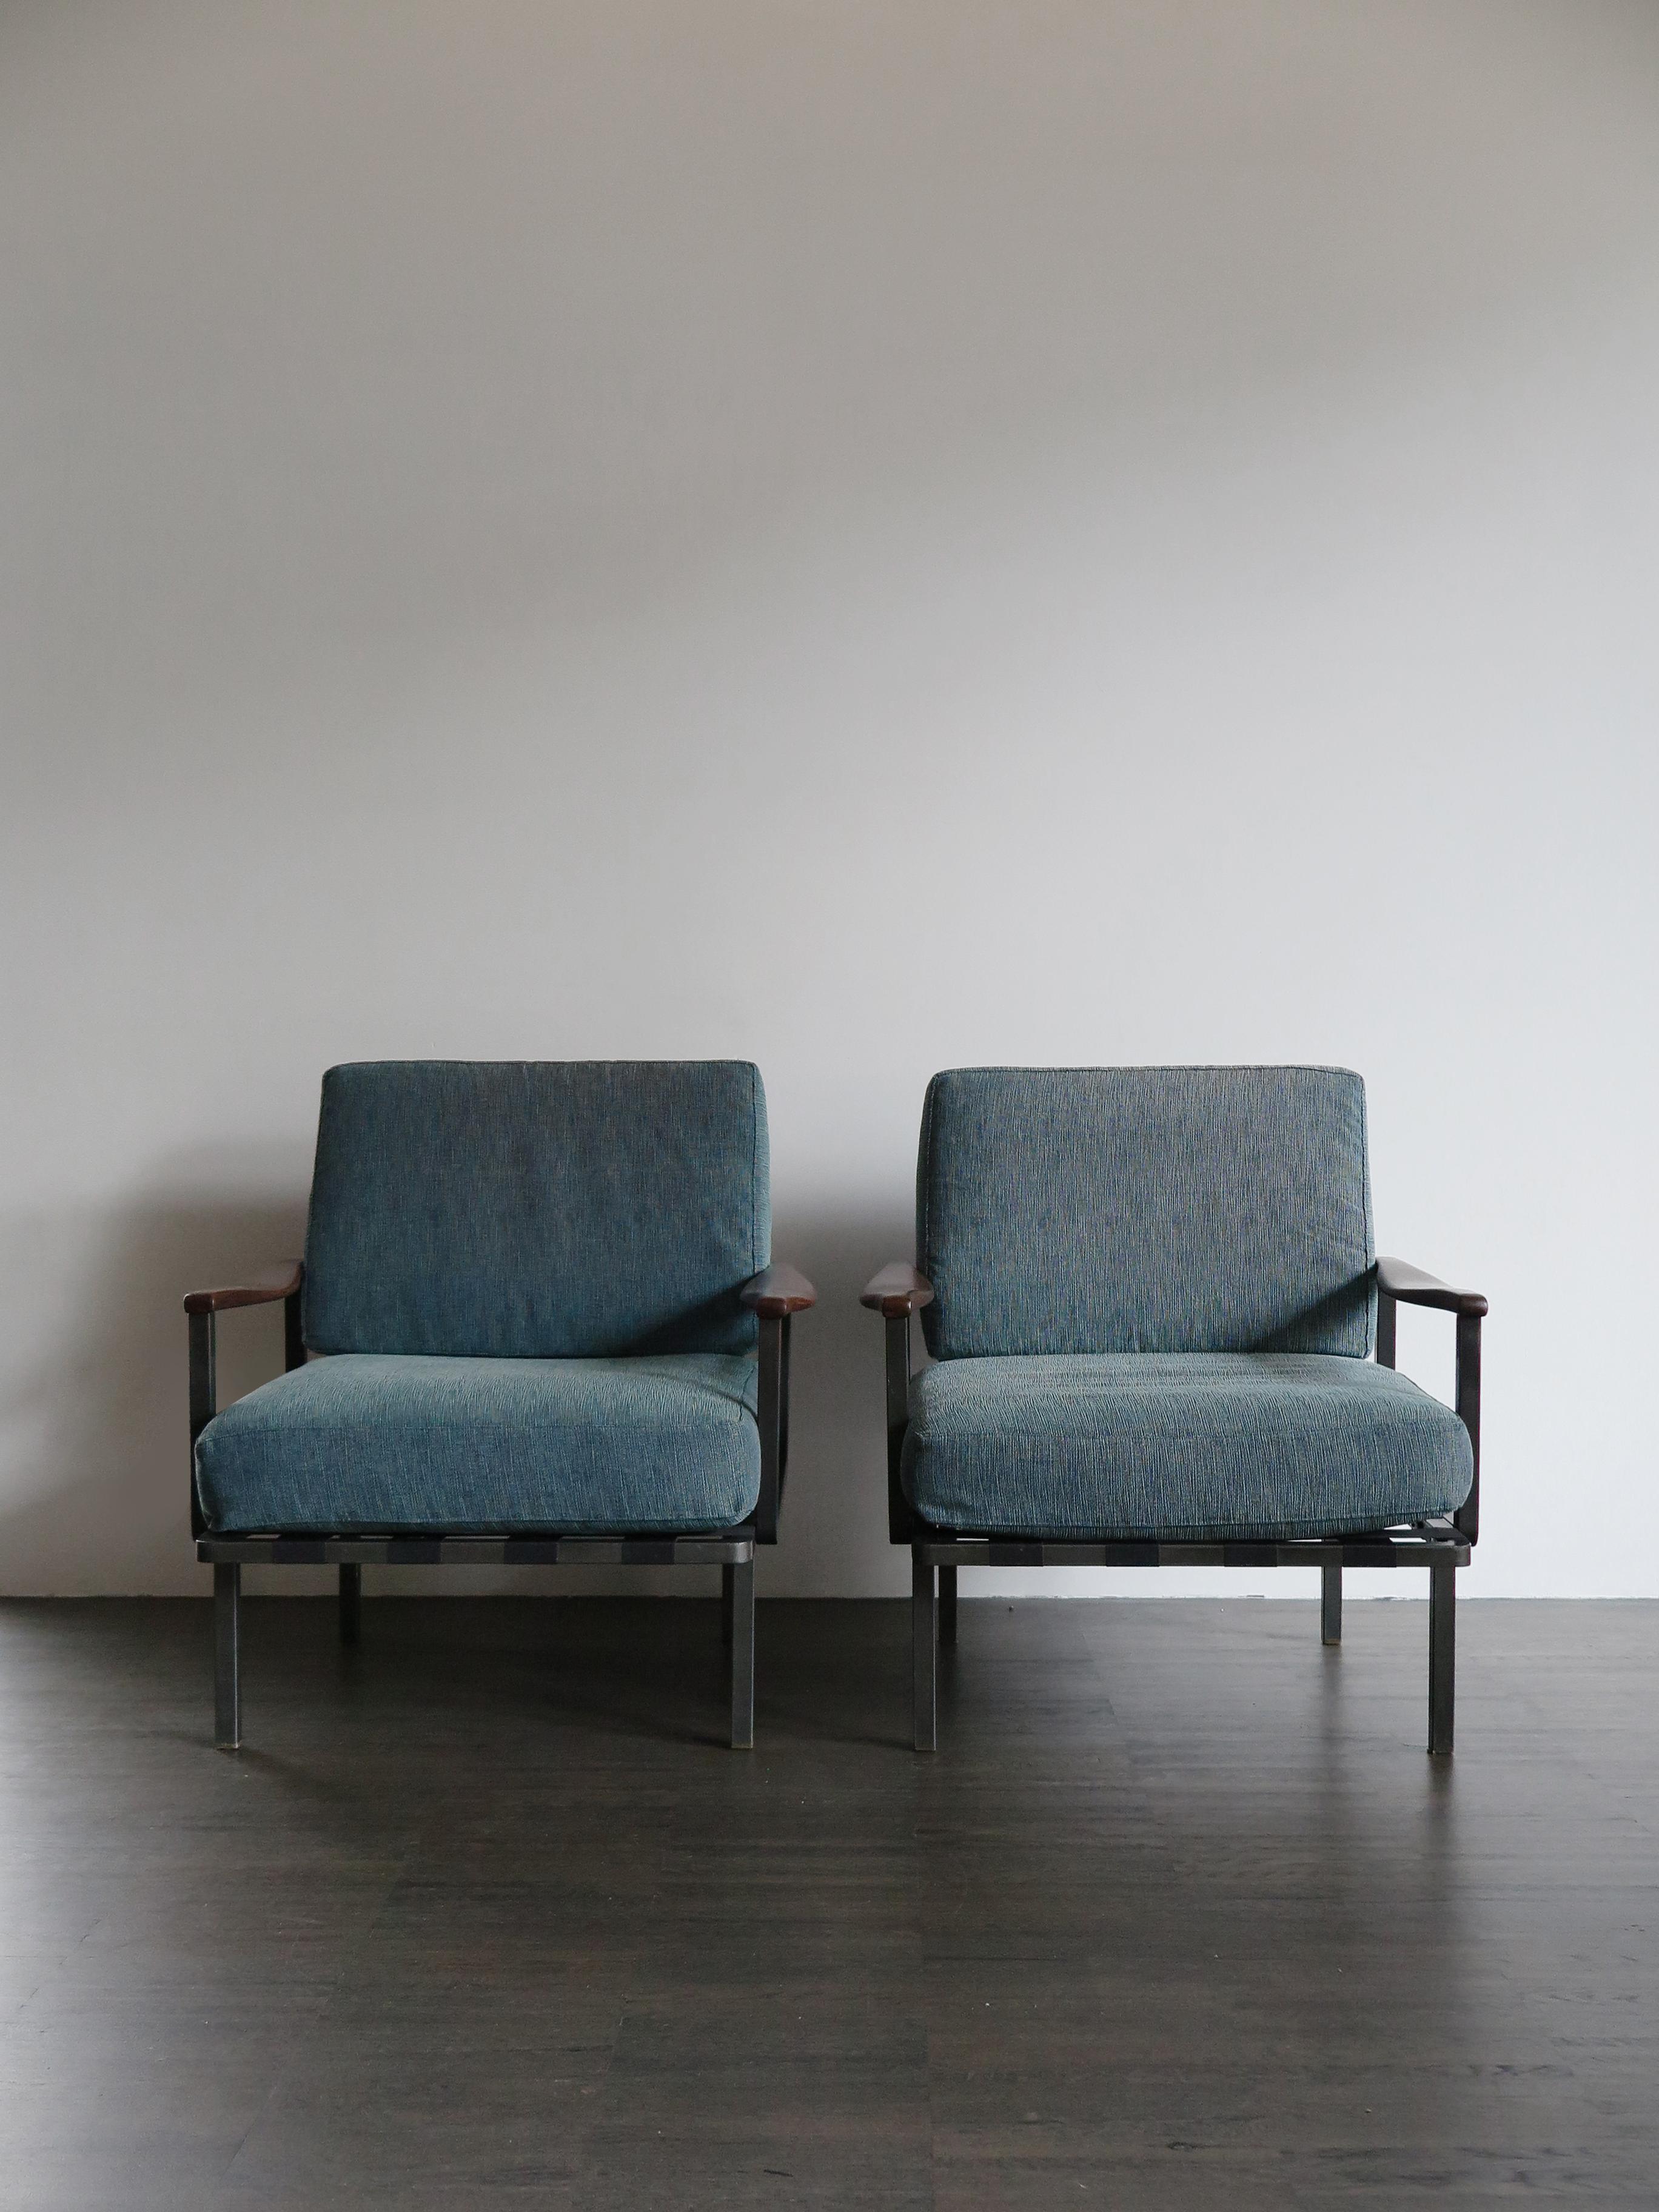 Set of two Mid-Century Modern design Italian armchairs design Osvaldo Borsani for Tecno from 1961, structure in dark gray painted metal, movable seat and back cushions upholstered in blue-green fabric, armrests in shaped wood,